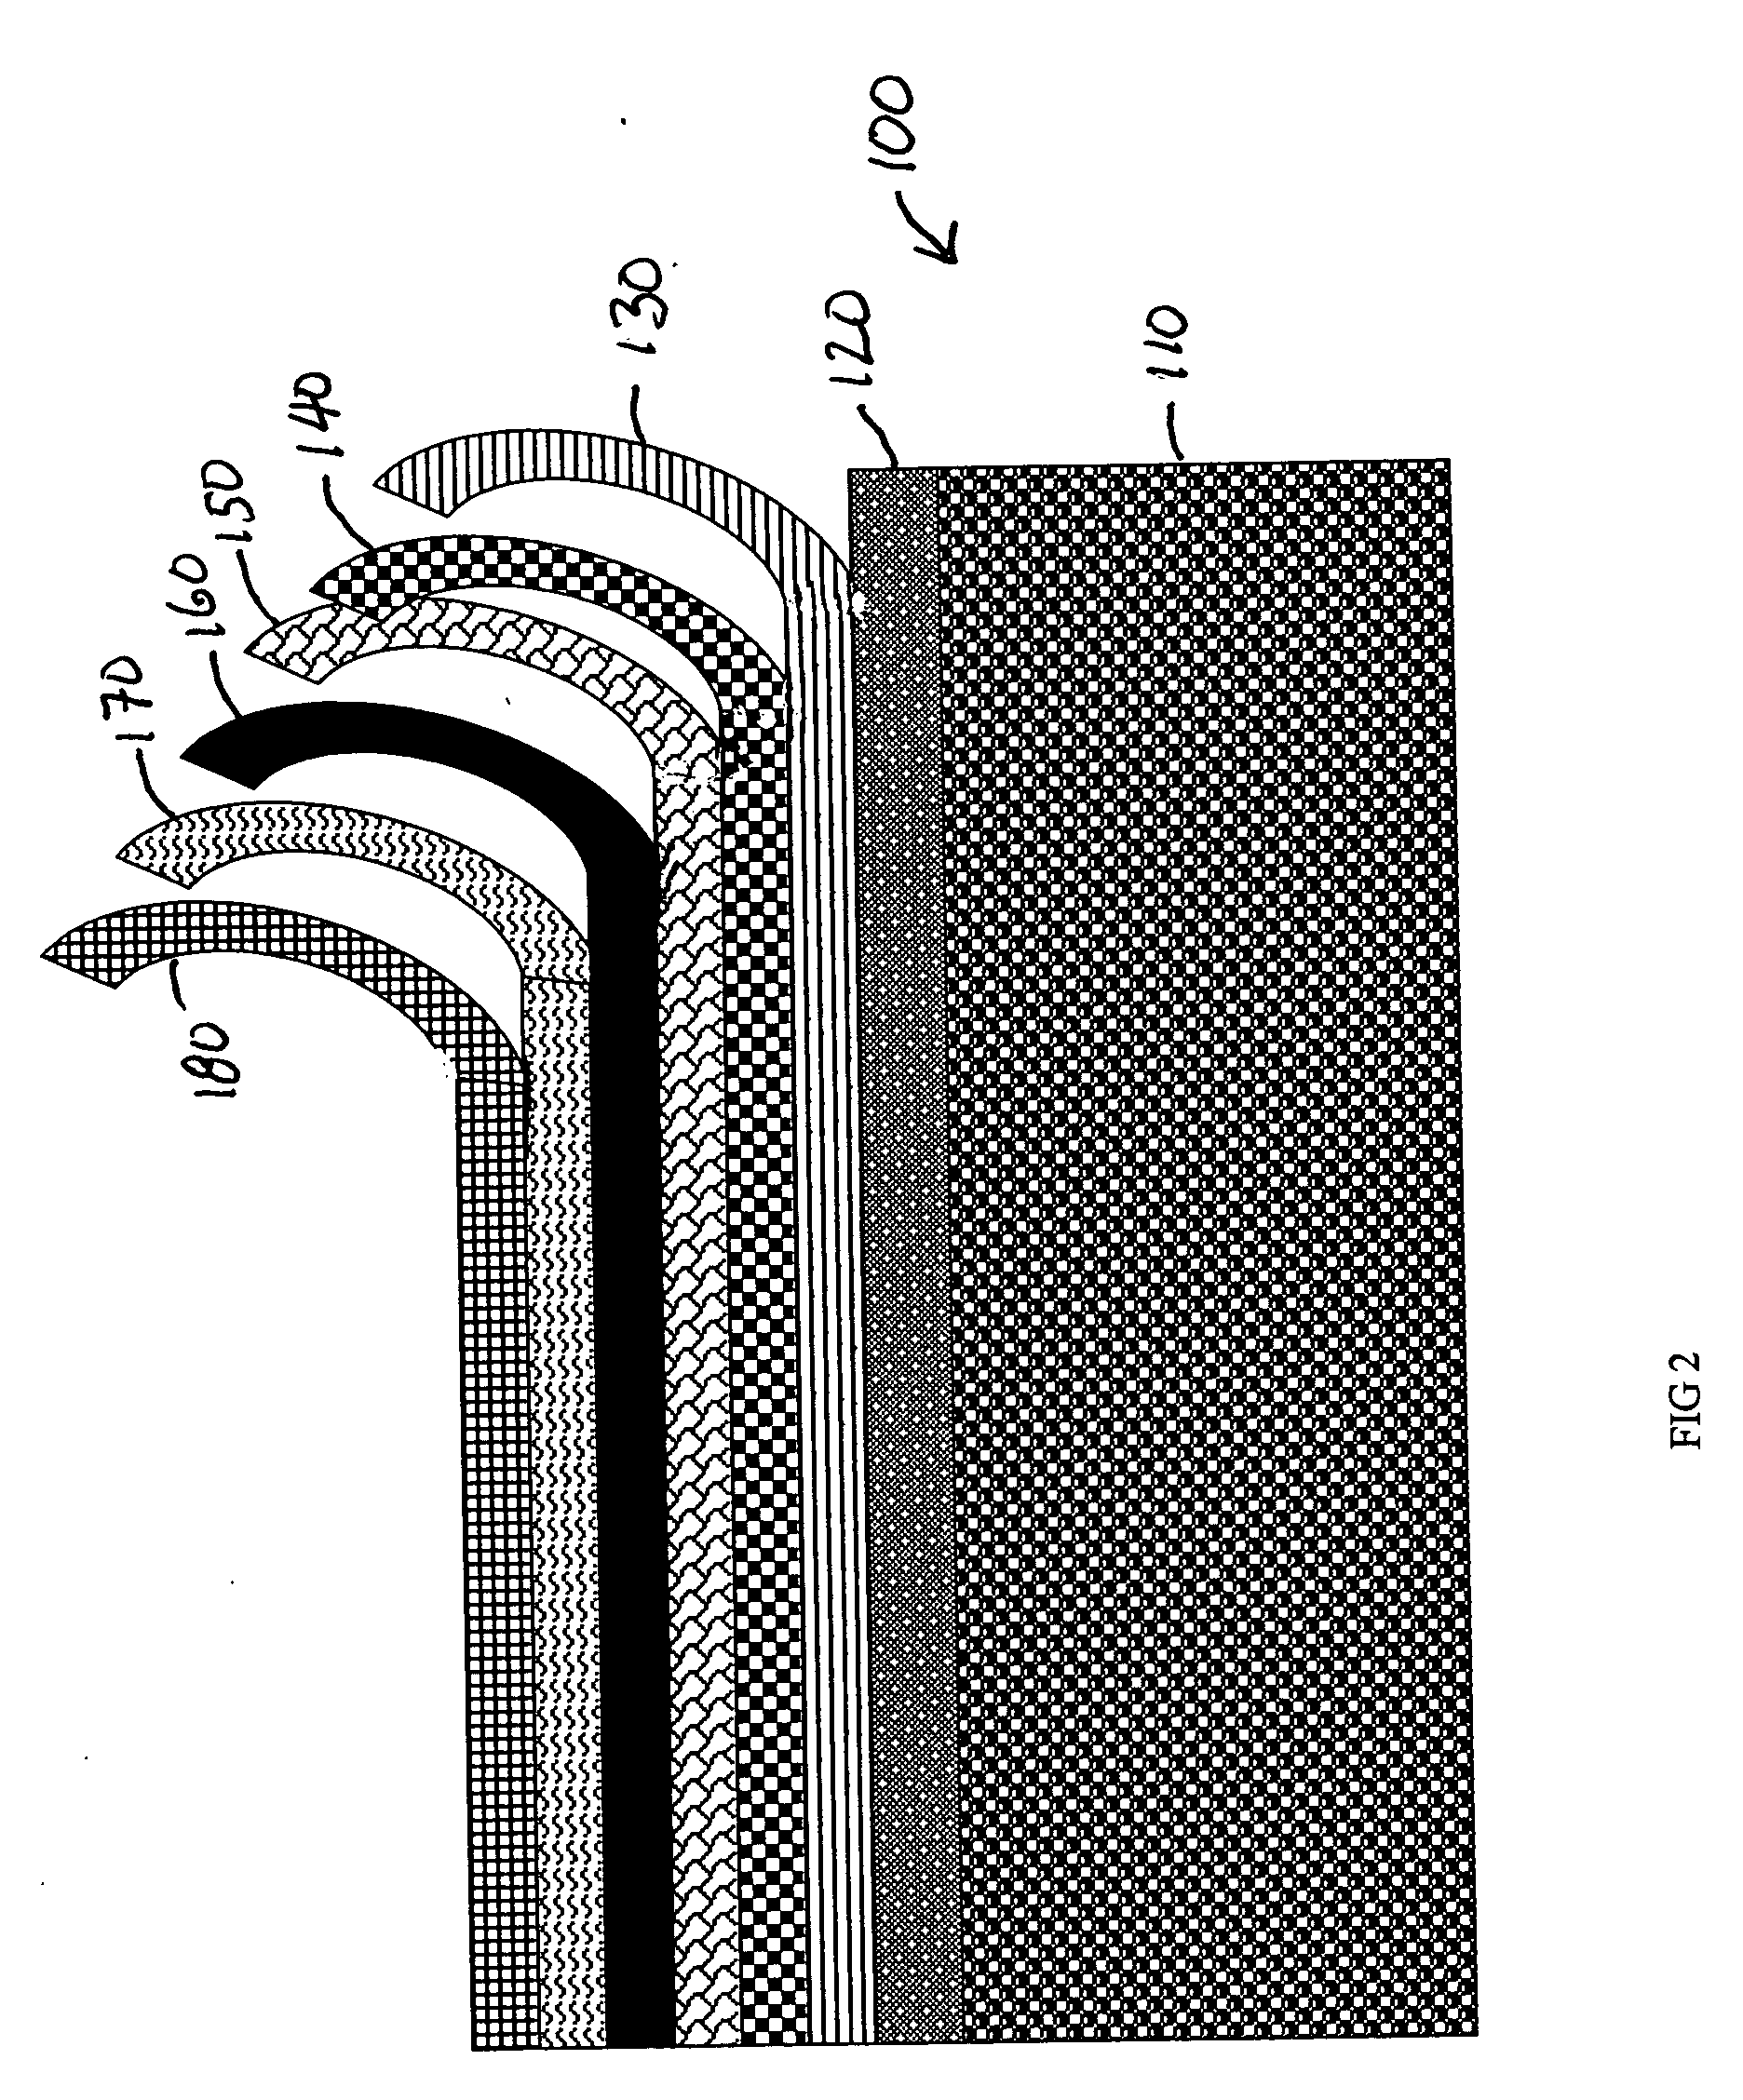 Decoratively finished thermoplastic product and method for manufacturing same